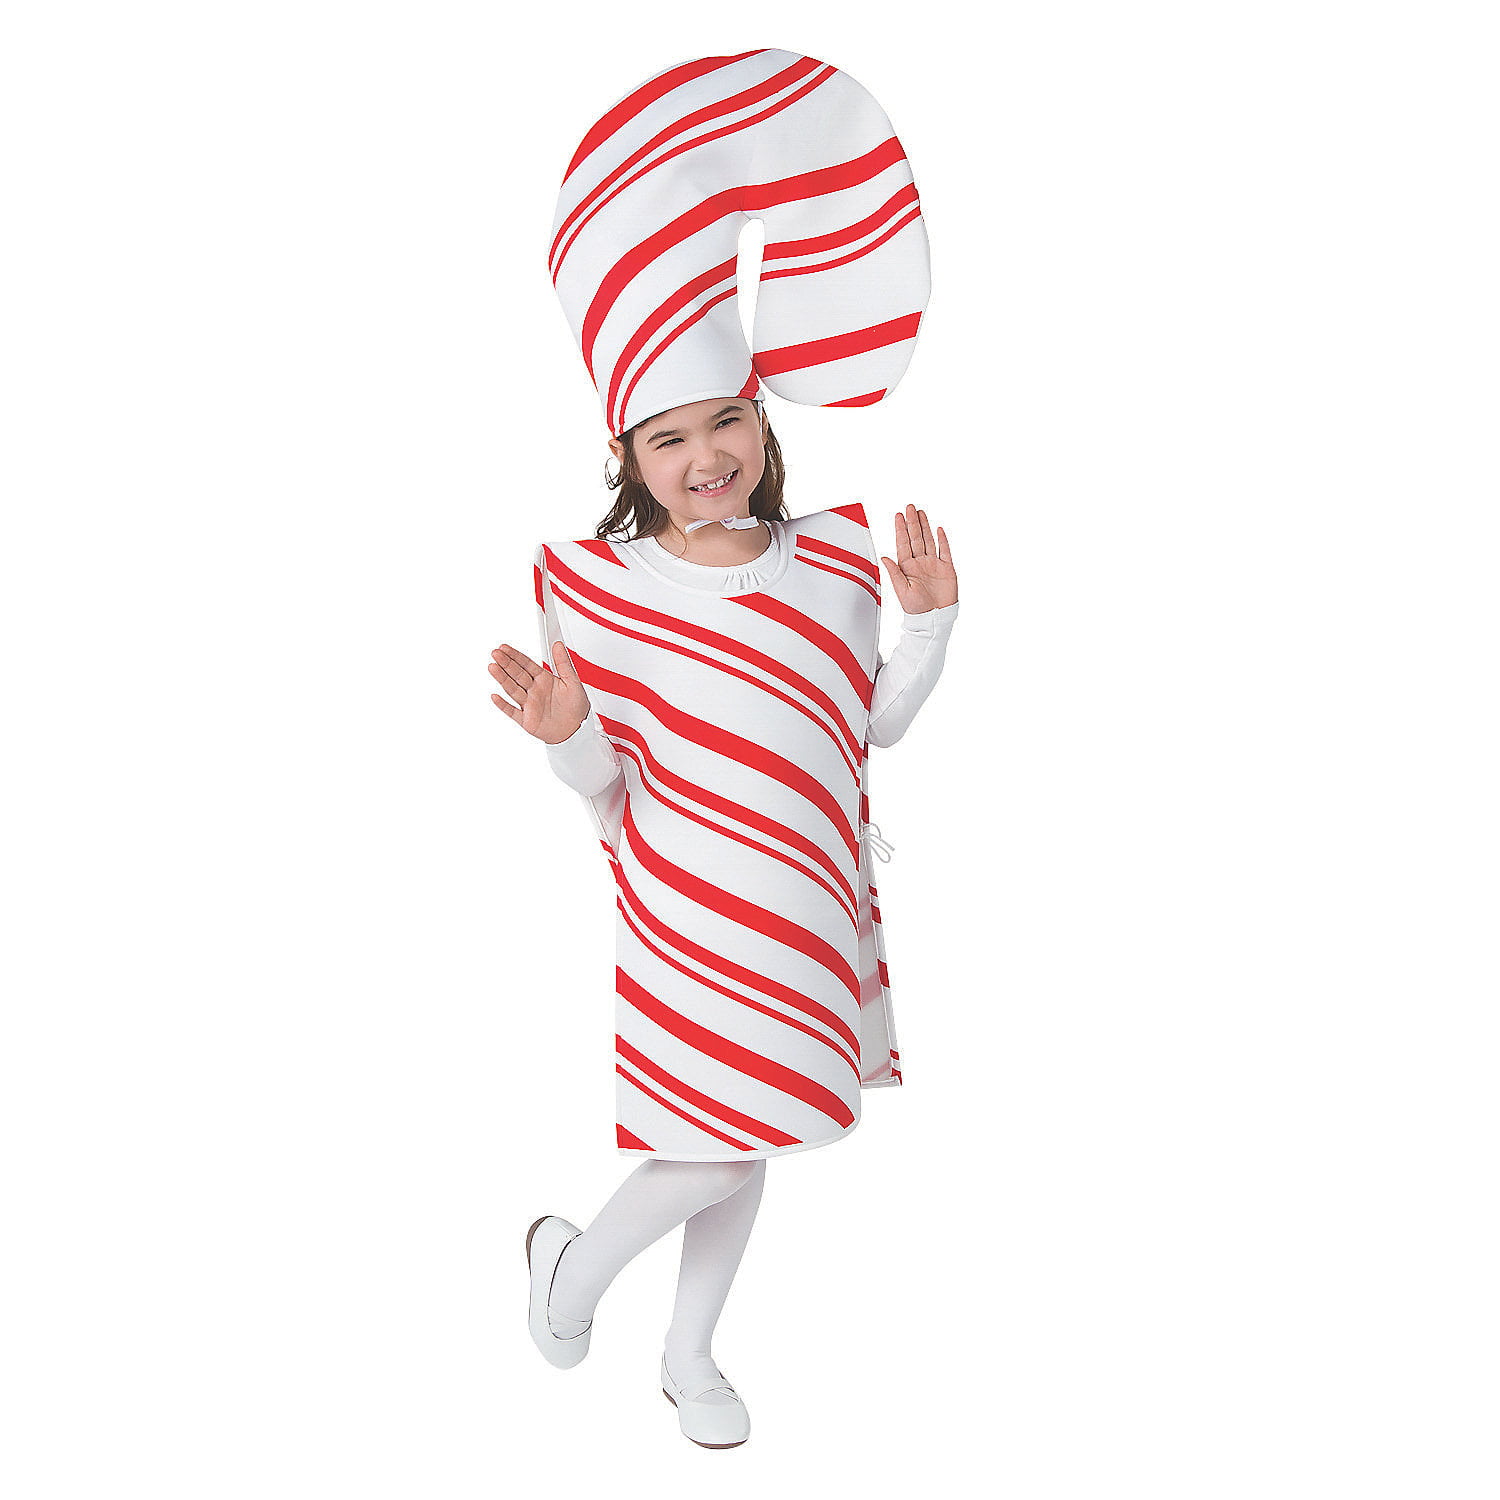 Candy Cane Costume Apparel Accessories 2 Pieces